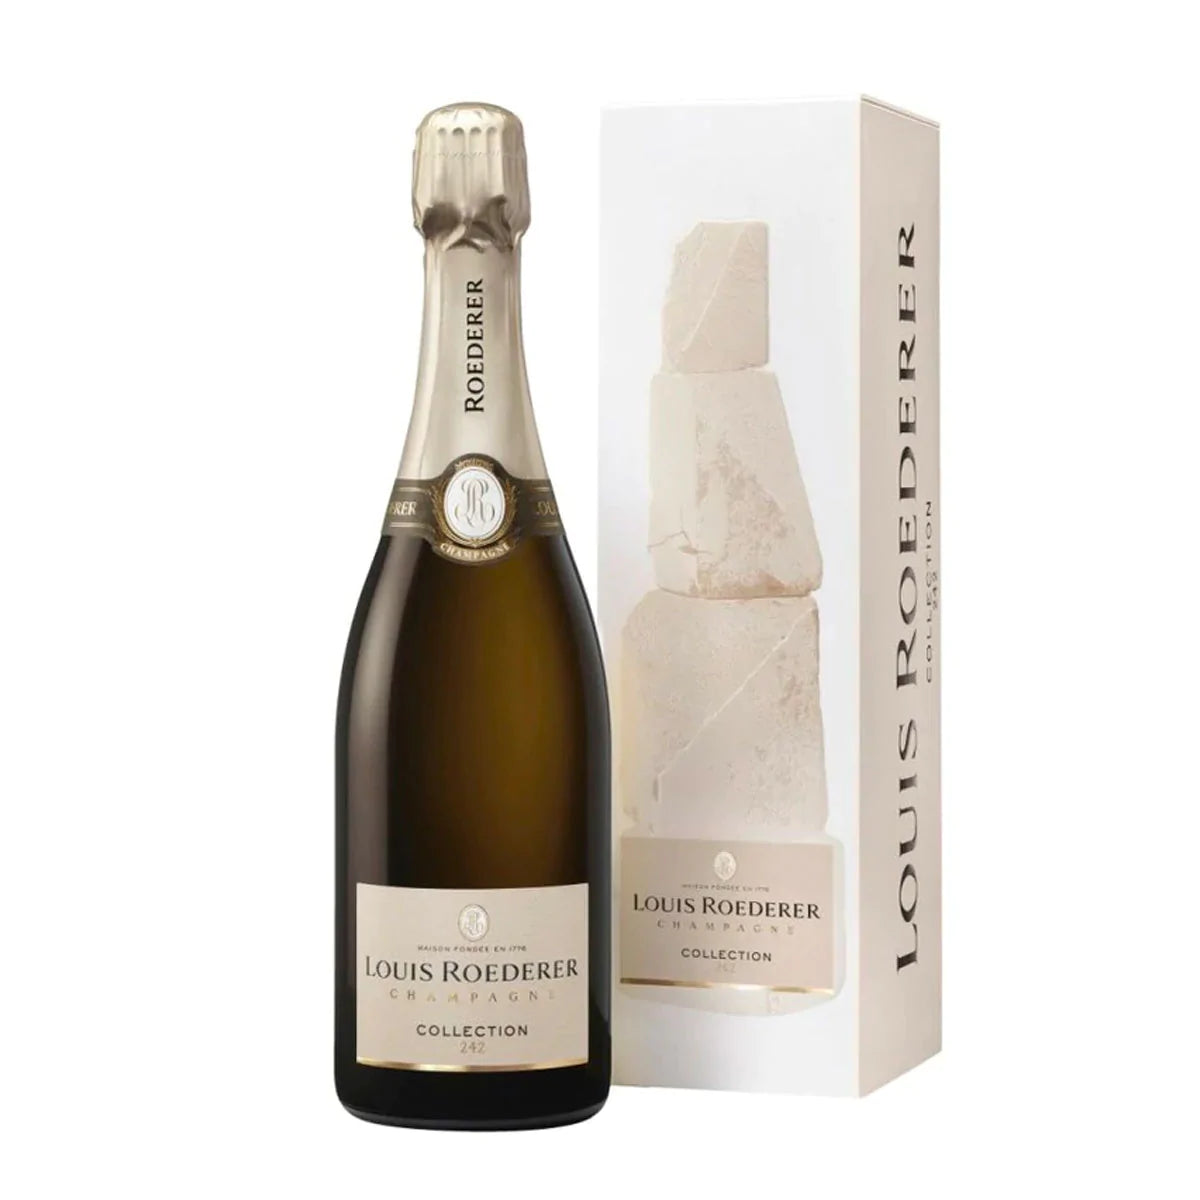 LOUIS ROEDERER COLLECTION 242 BRUT CHAMPAGNE 750ML